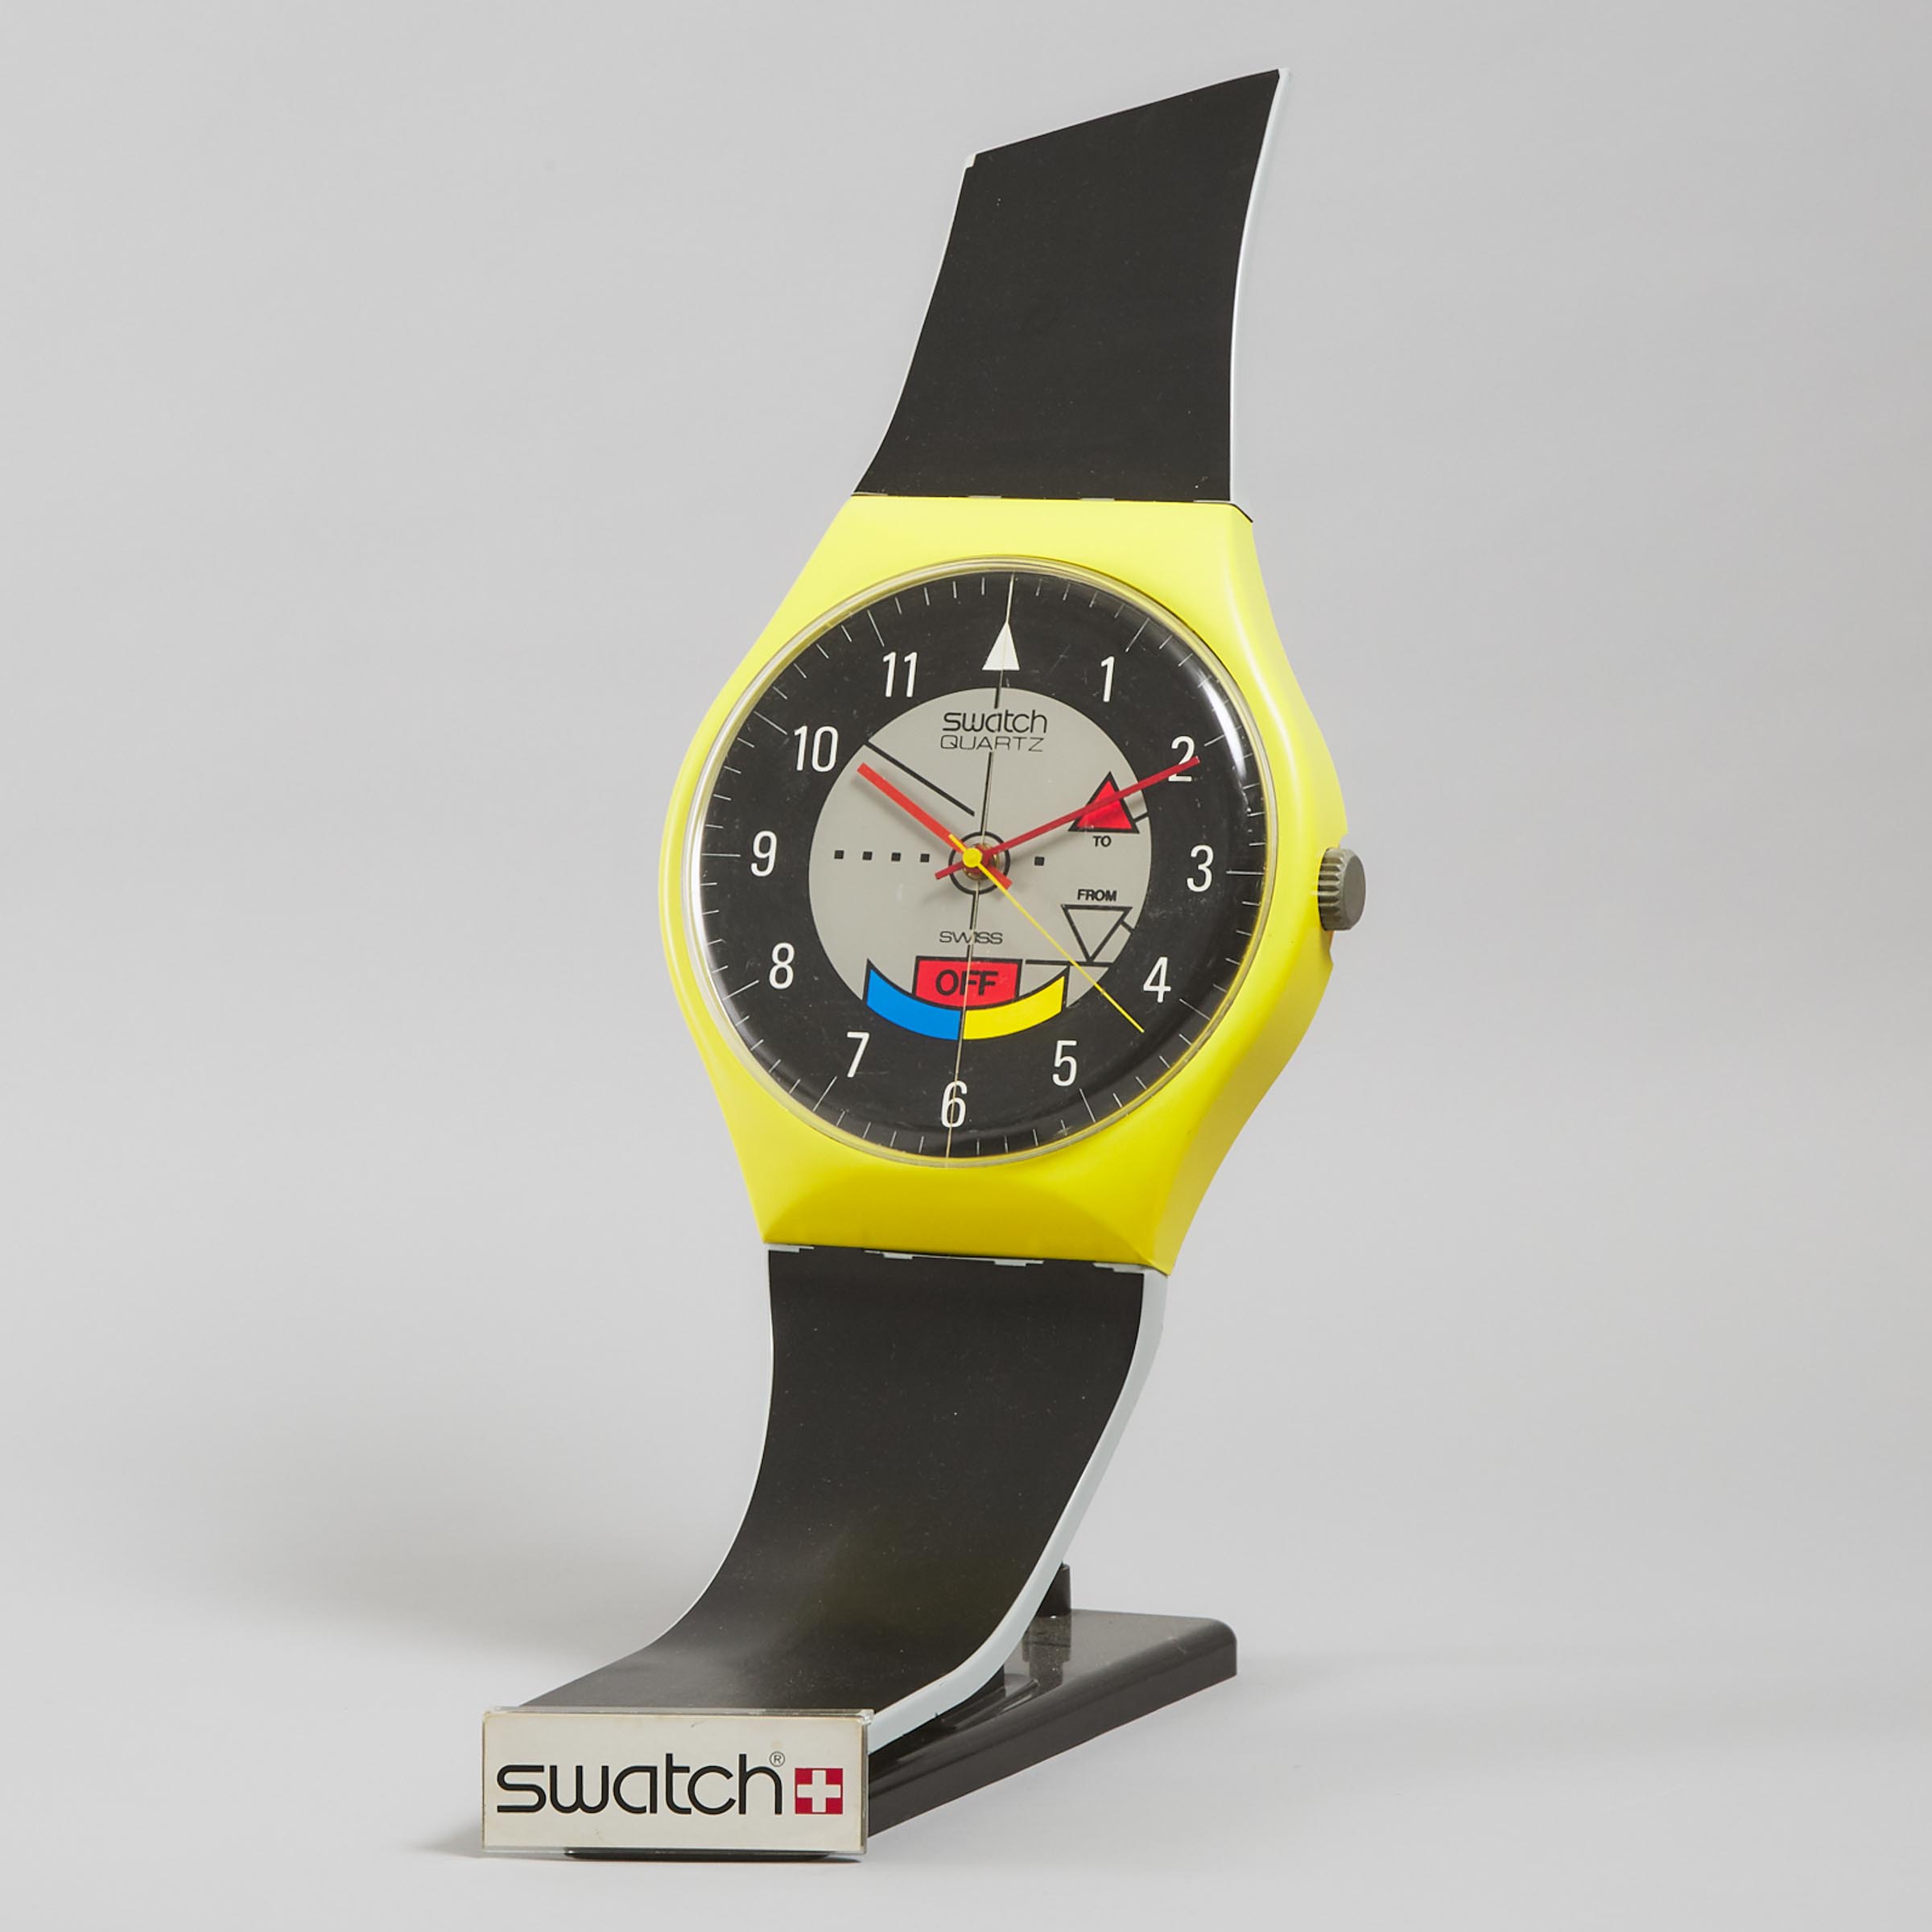 Swatch Watch Promotional Counter Top Display Clock, c.1985